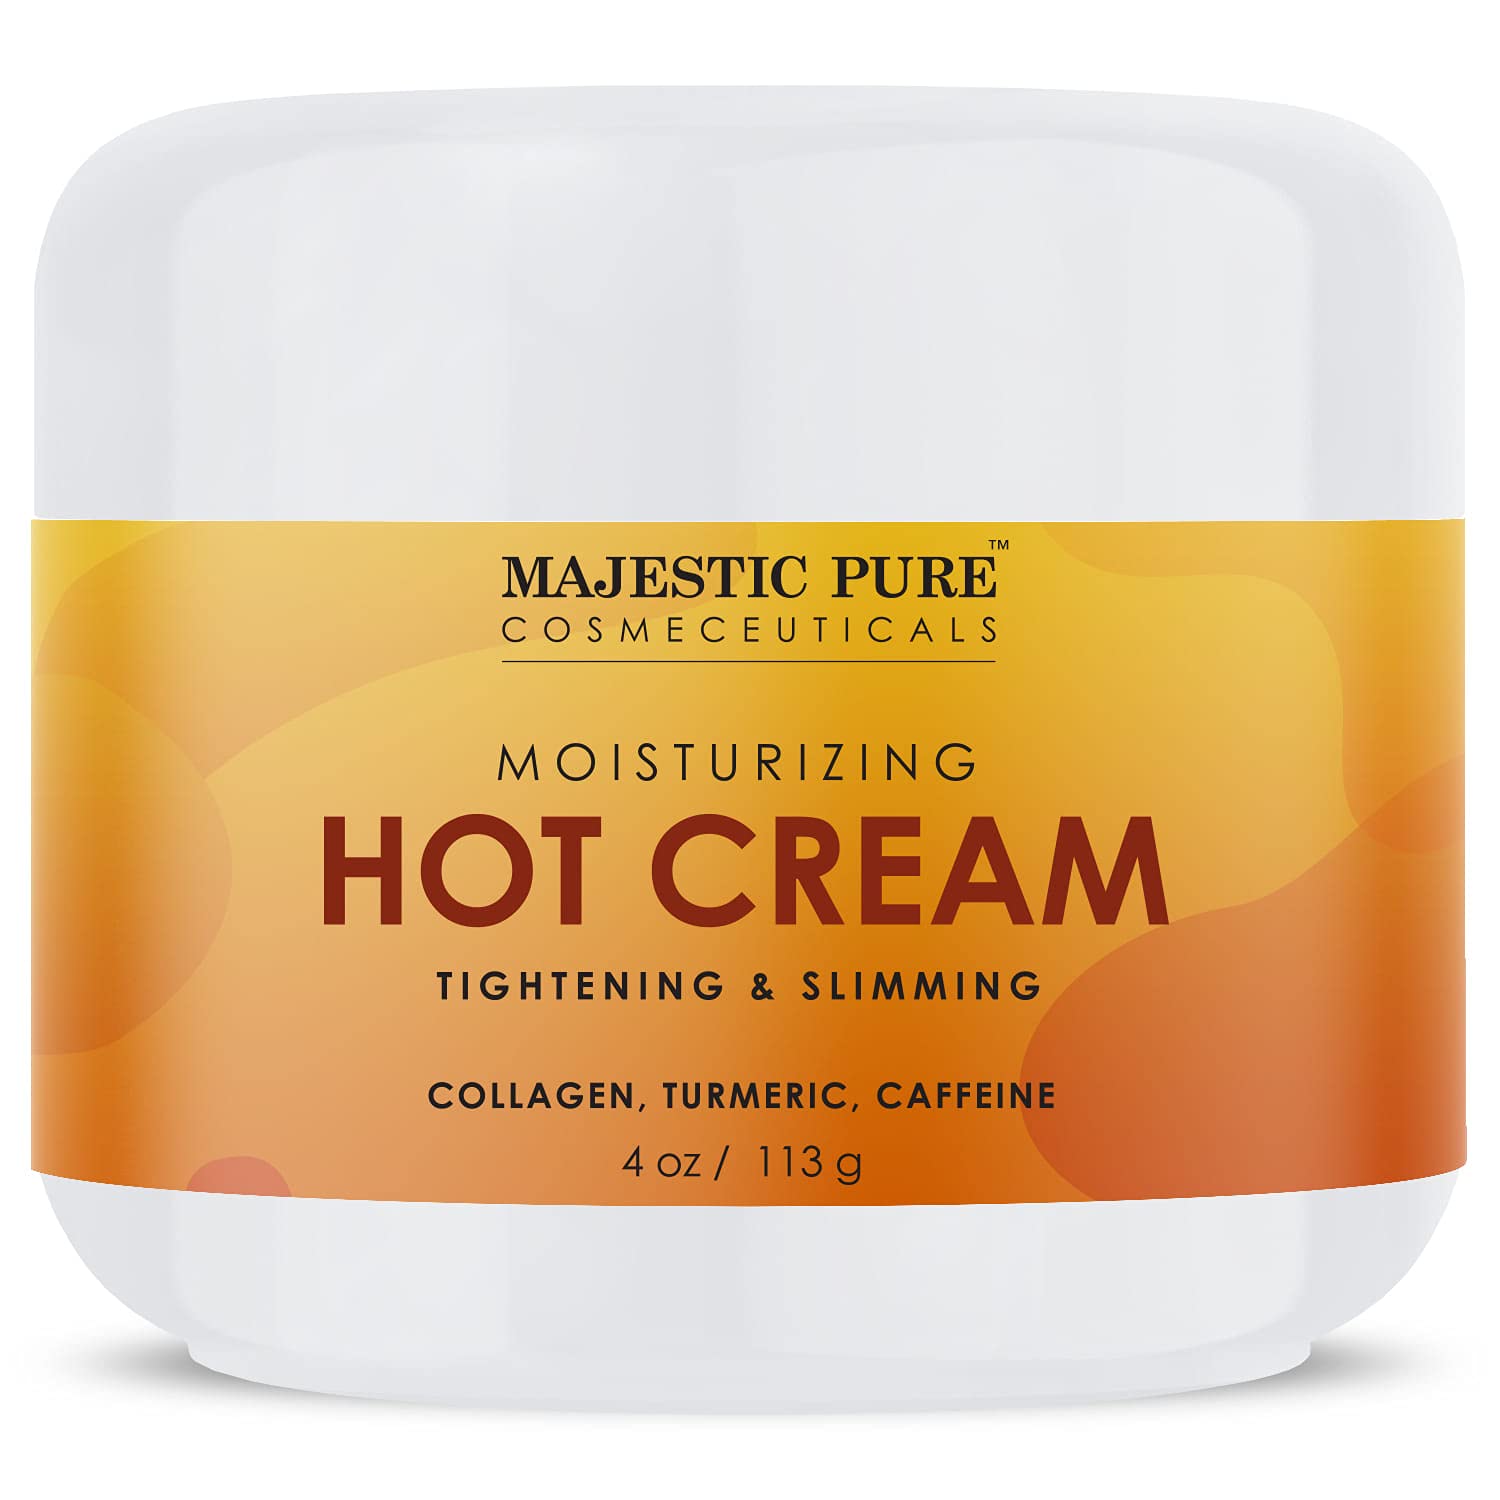 Majestic Pure Hot Cream - for Cellulite, Soothing, Relaxing, Tightening & Slimming - with Collagen, Turmeric, Vitamin A, E, - Body Firming Cream, 4 oz